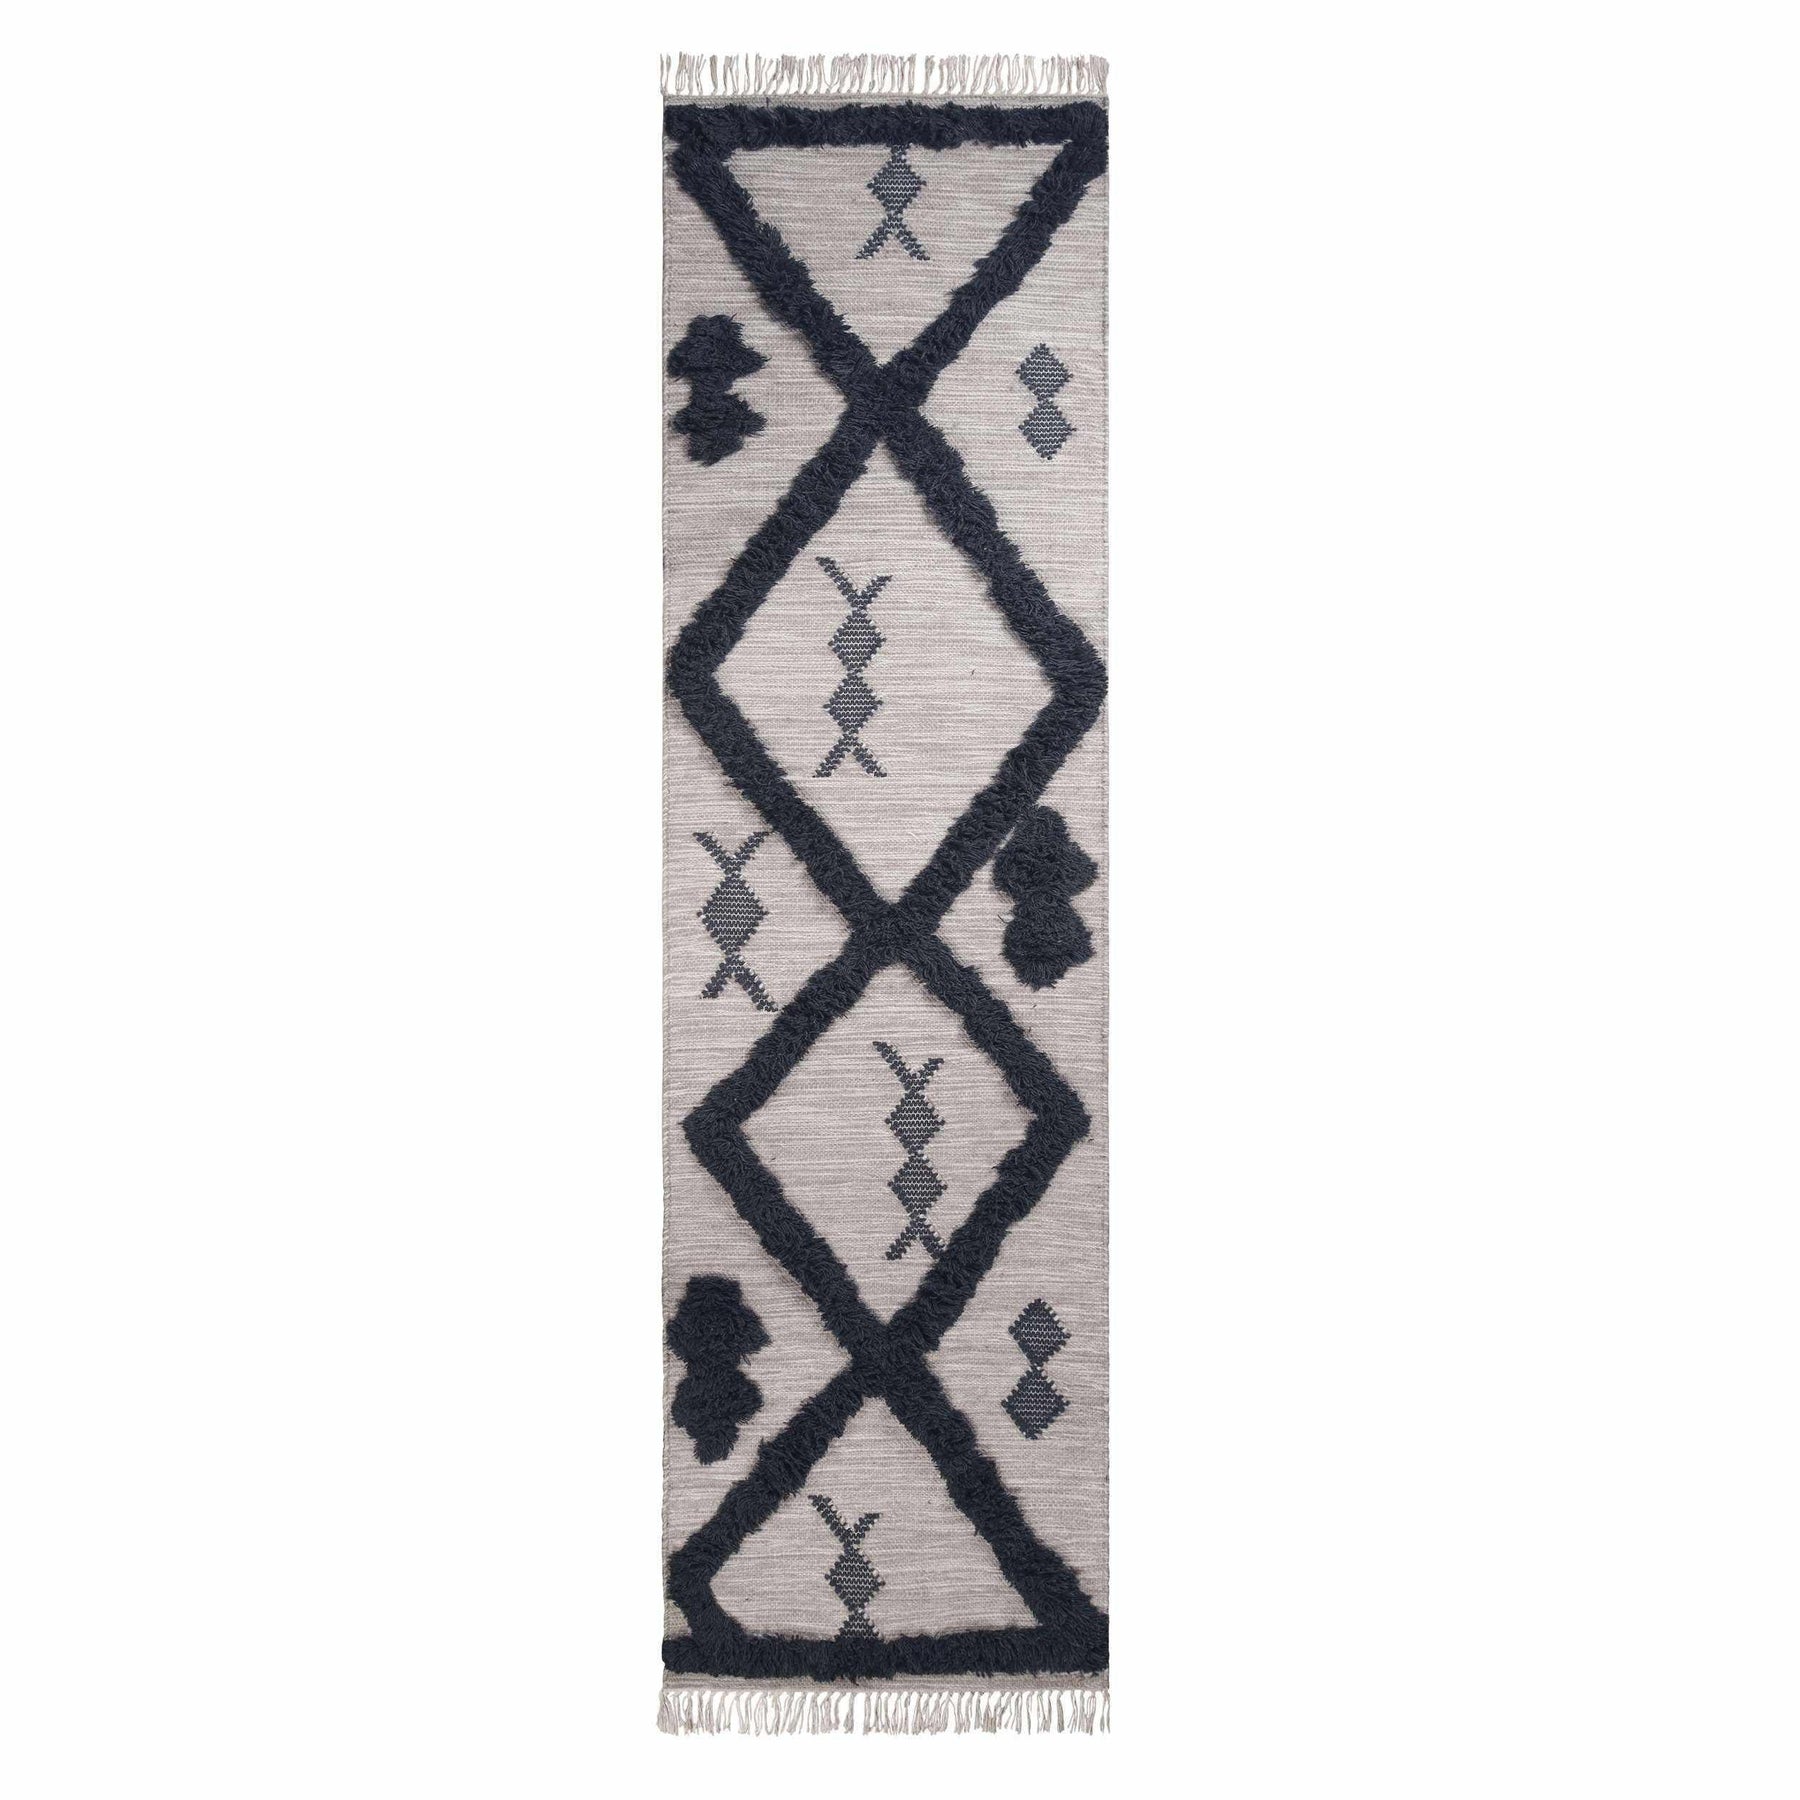 Superior Southwestern Wool Abstract Line Geometric Fringe Area or Runner Rug - Charcoal